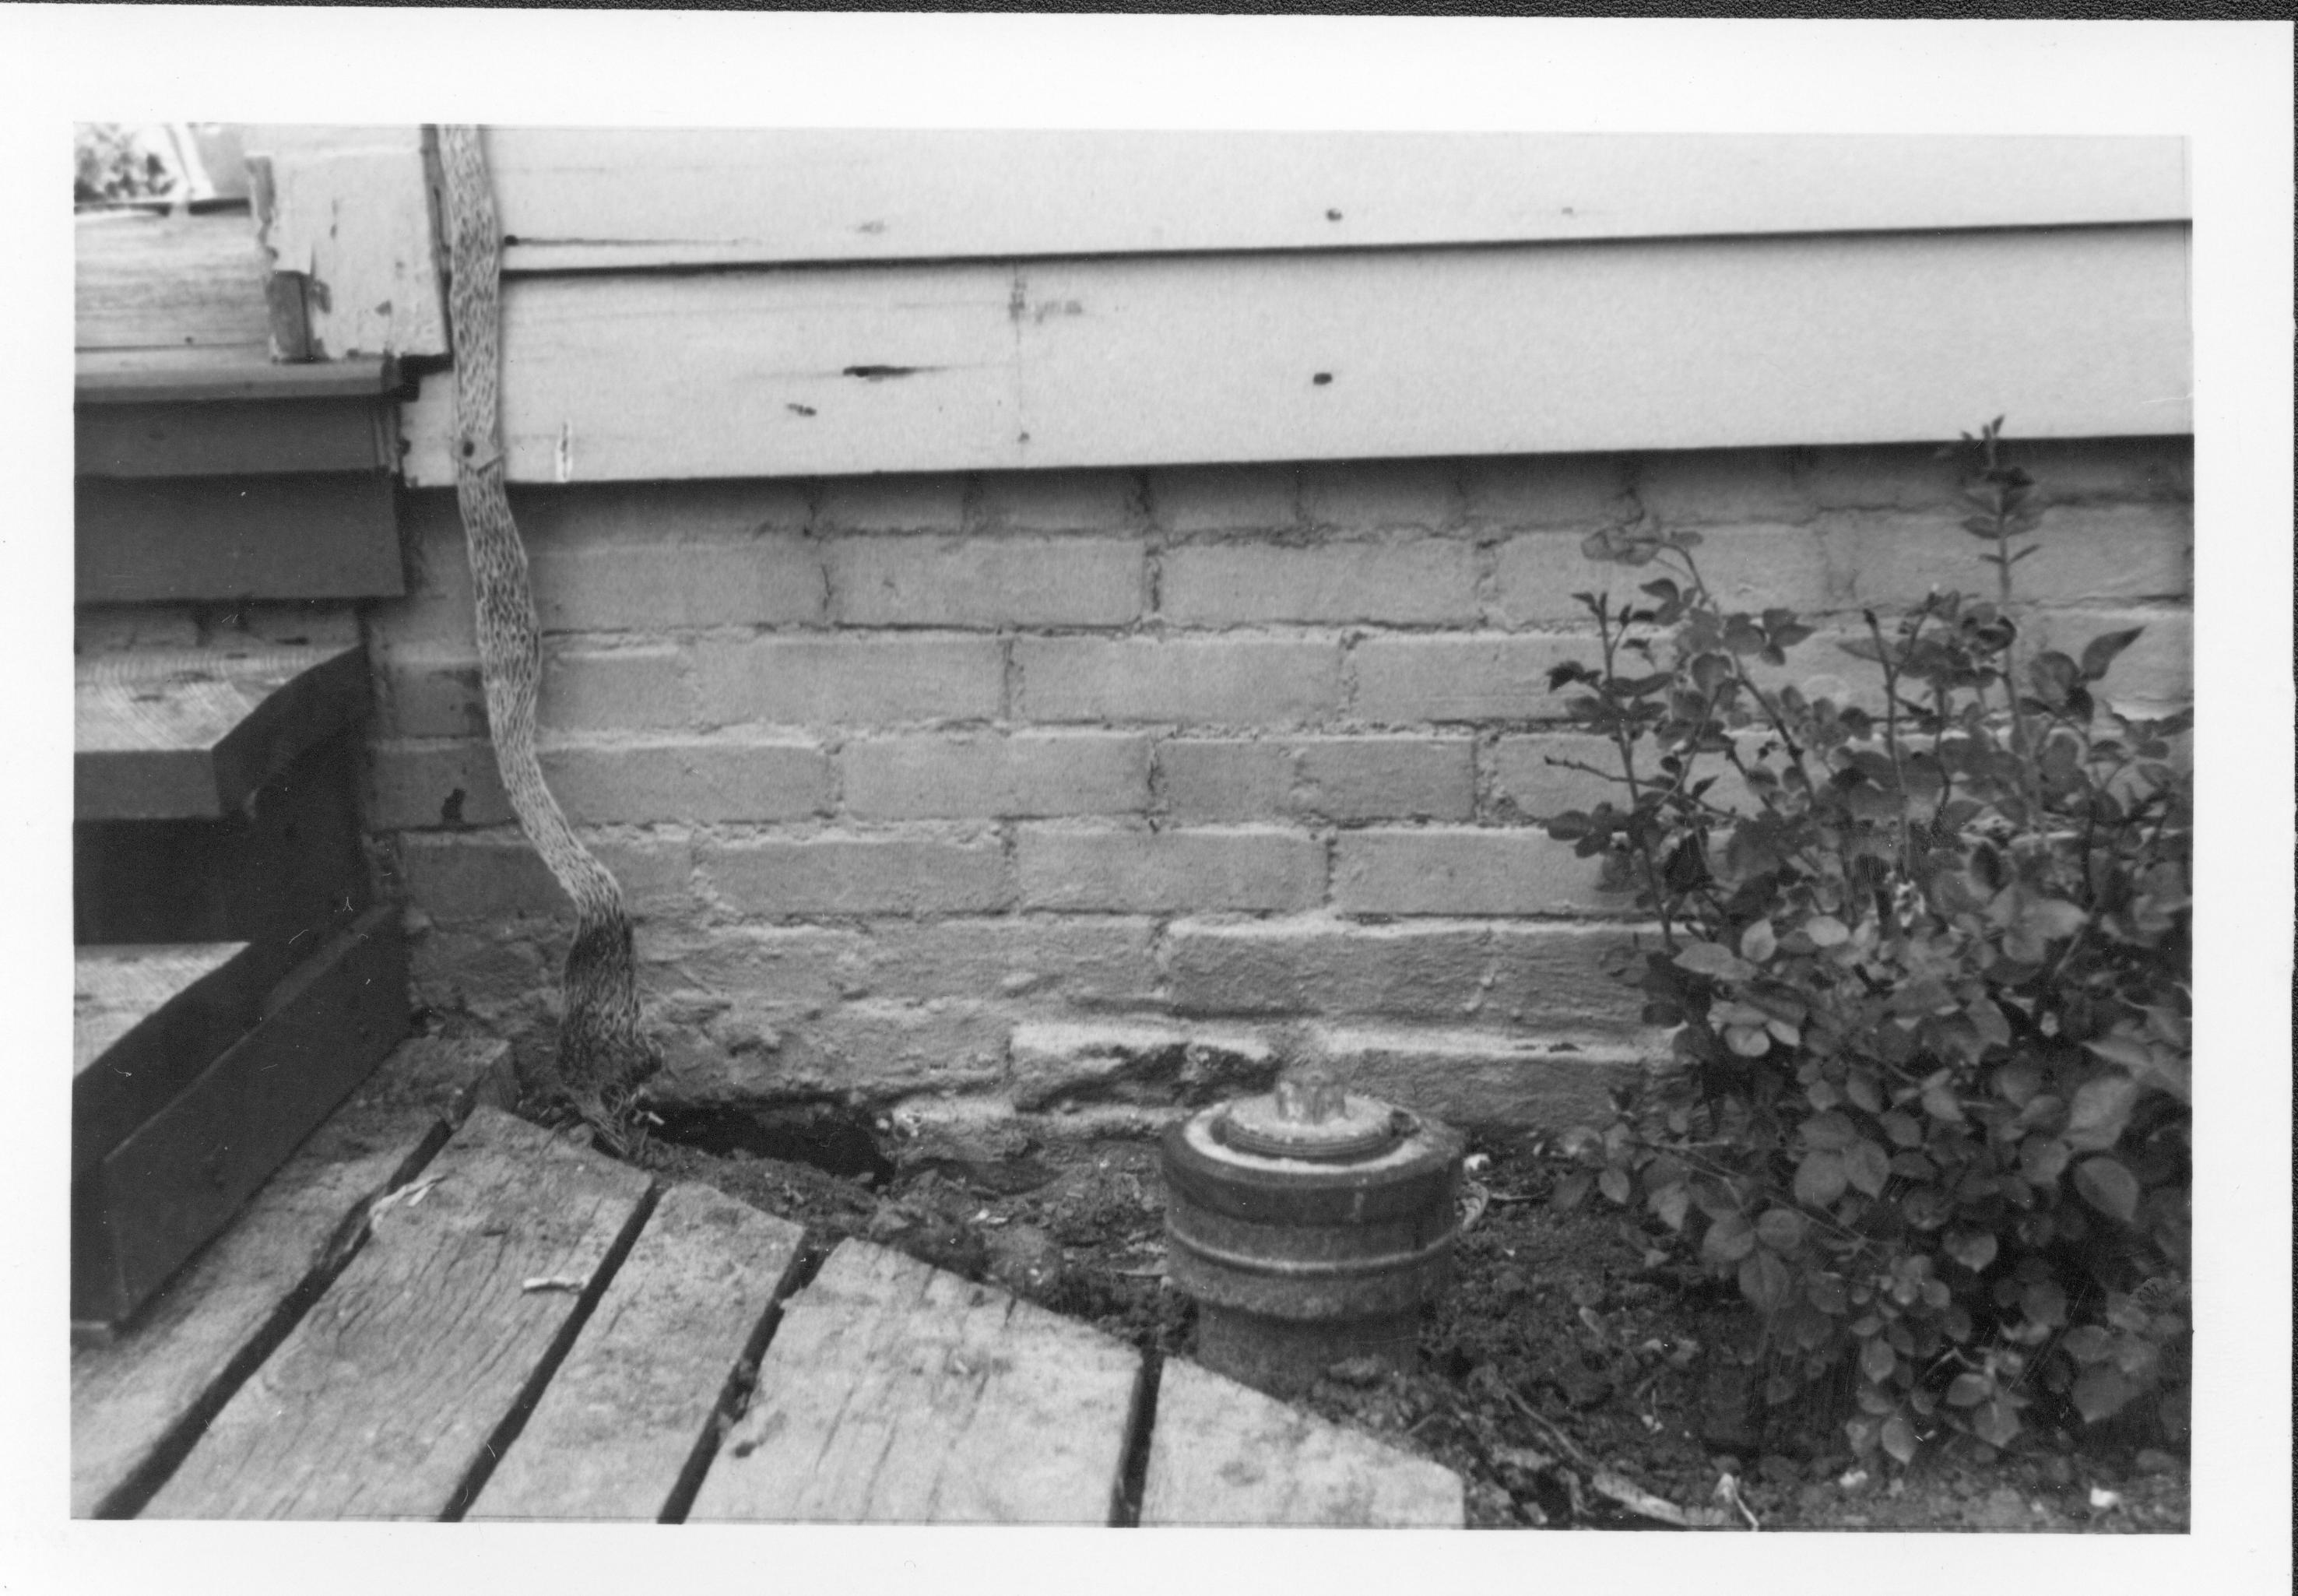 Drain pipe near the Lincoln Home foundation, east of the south porch and kitchen. Photographer facing west.